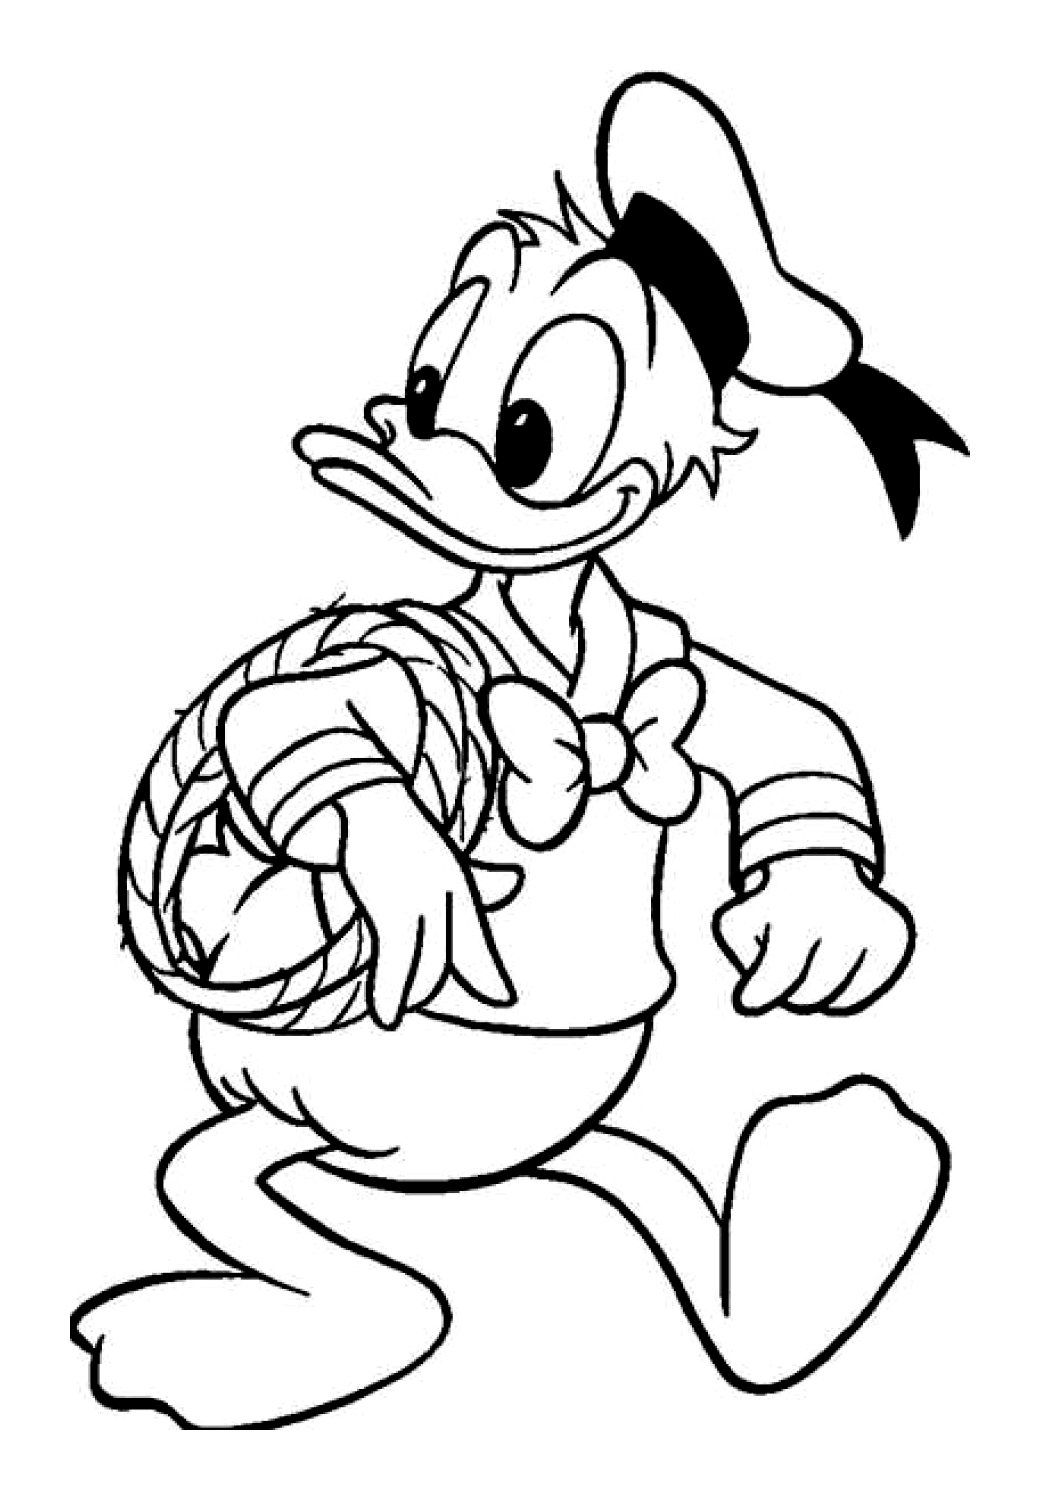 Coloring page: Donald Duck (Cartoons) #30272 - Free Printable Coloring Pages